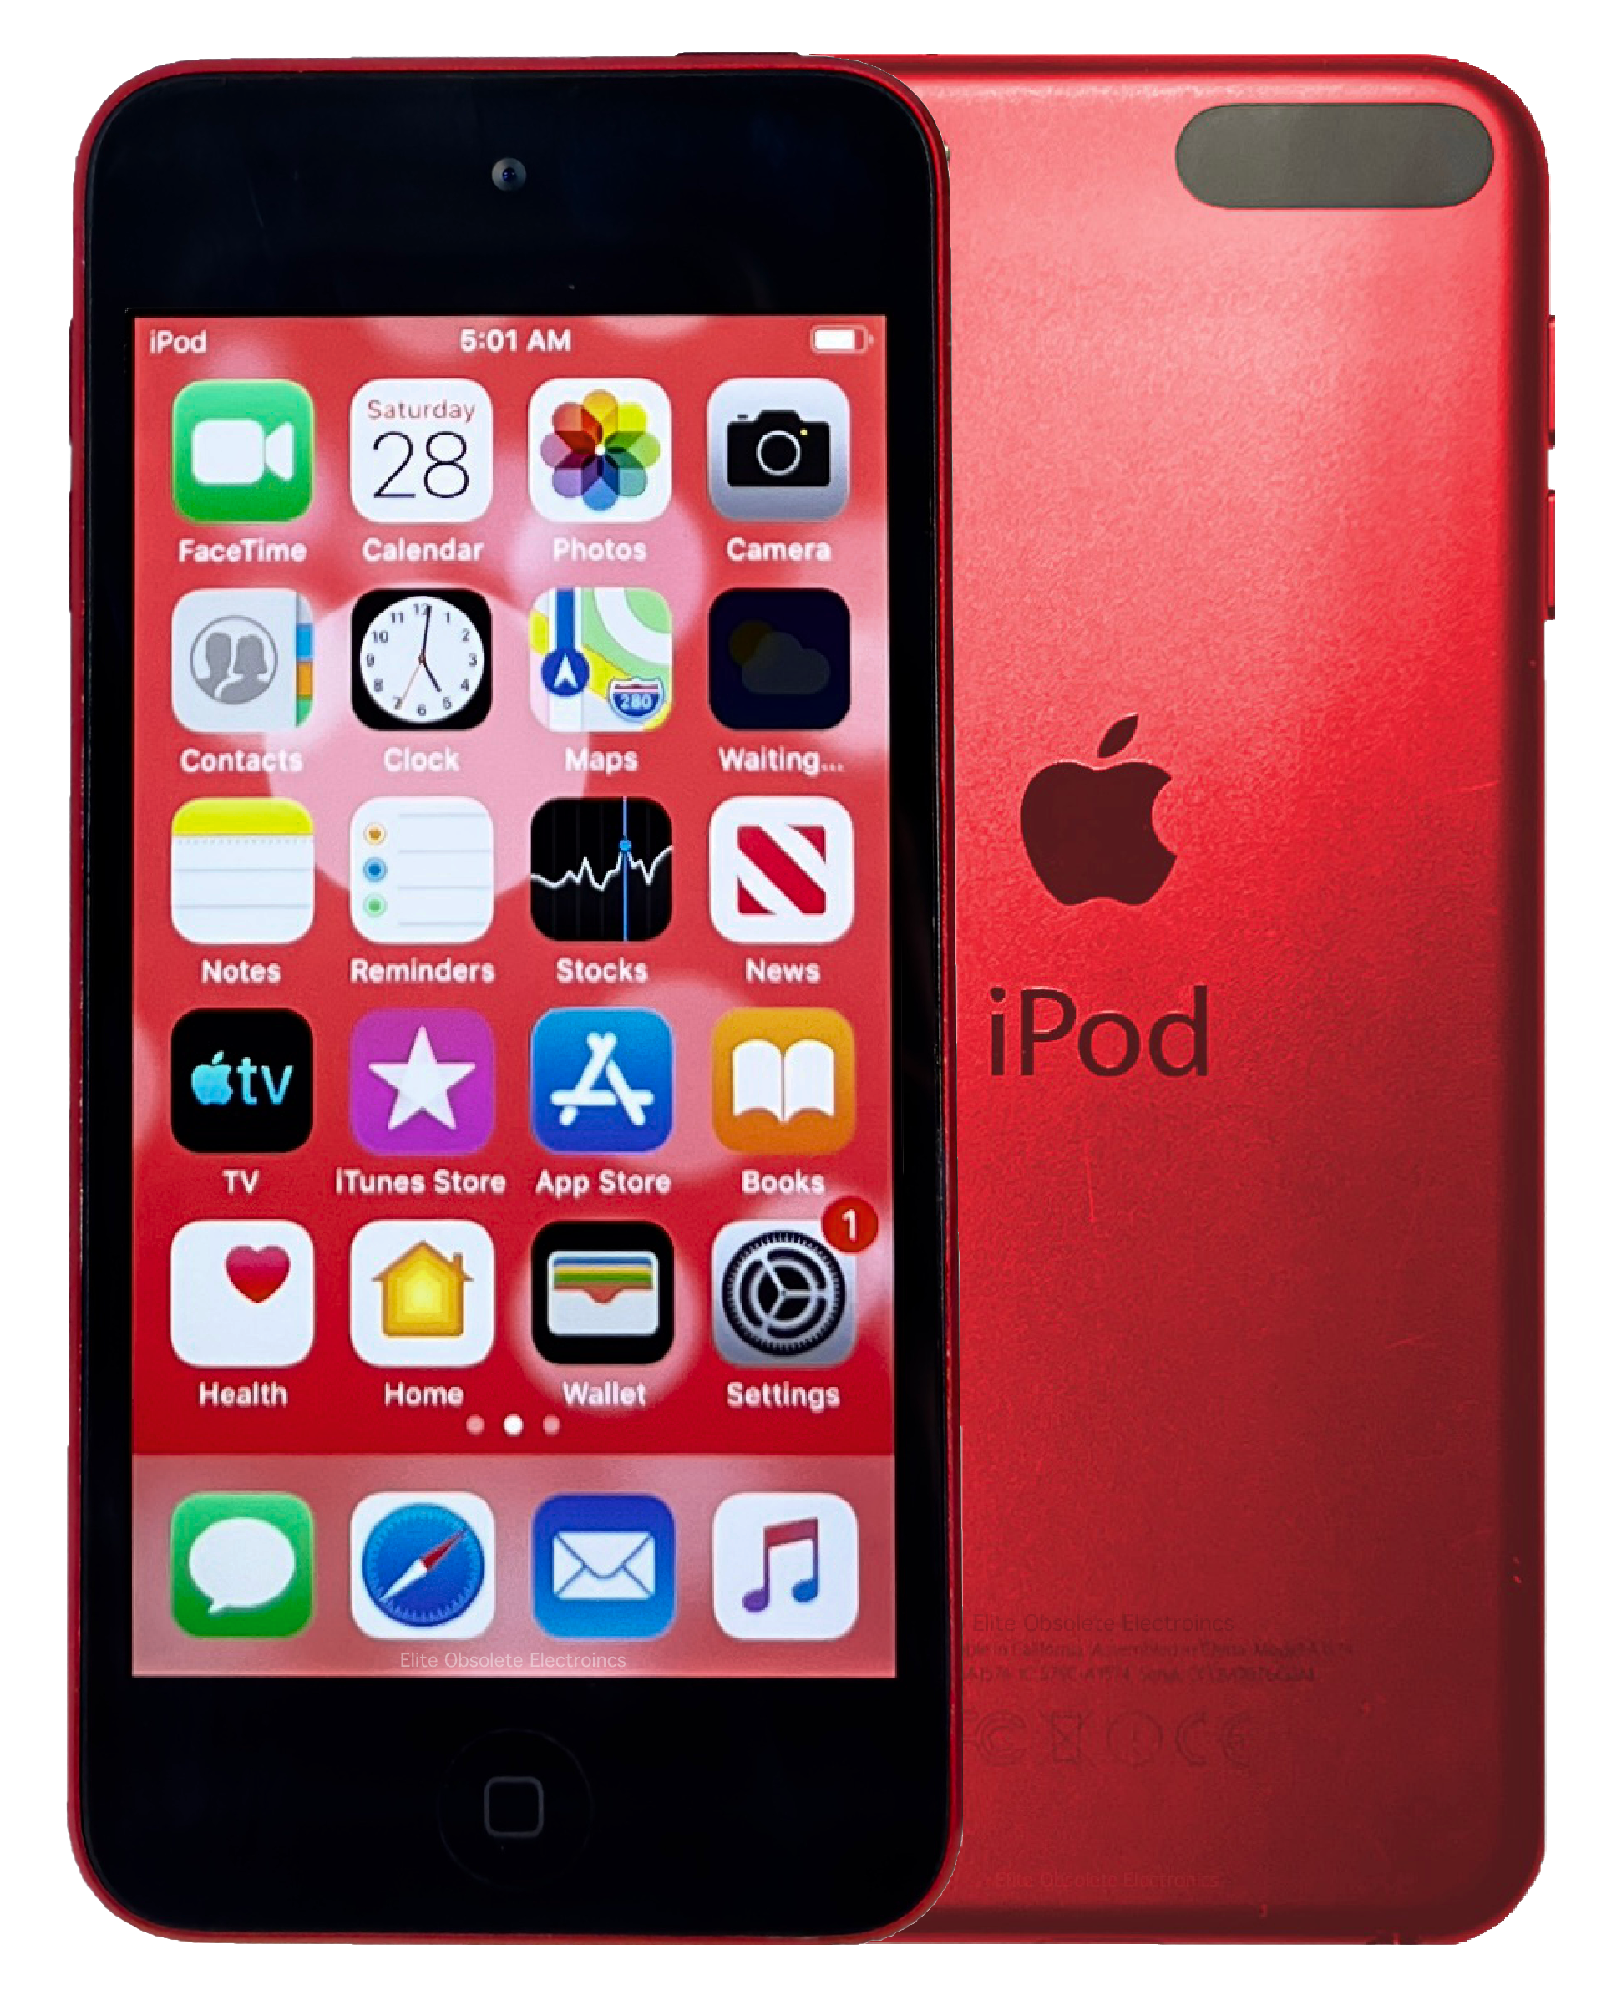 Refurbished Apple iPod Touch 6th Generation Product Red & Black 32GB A1574 MKJ22LL/A